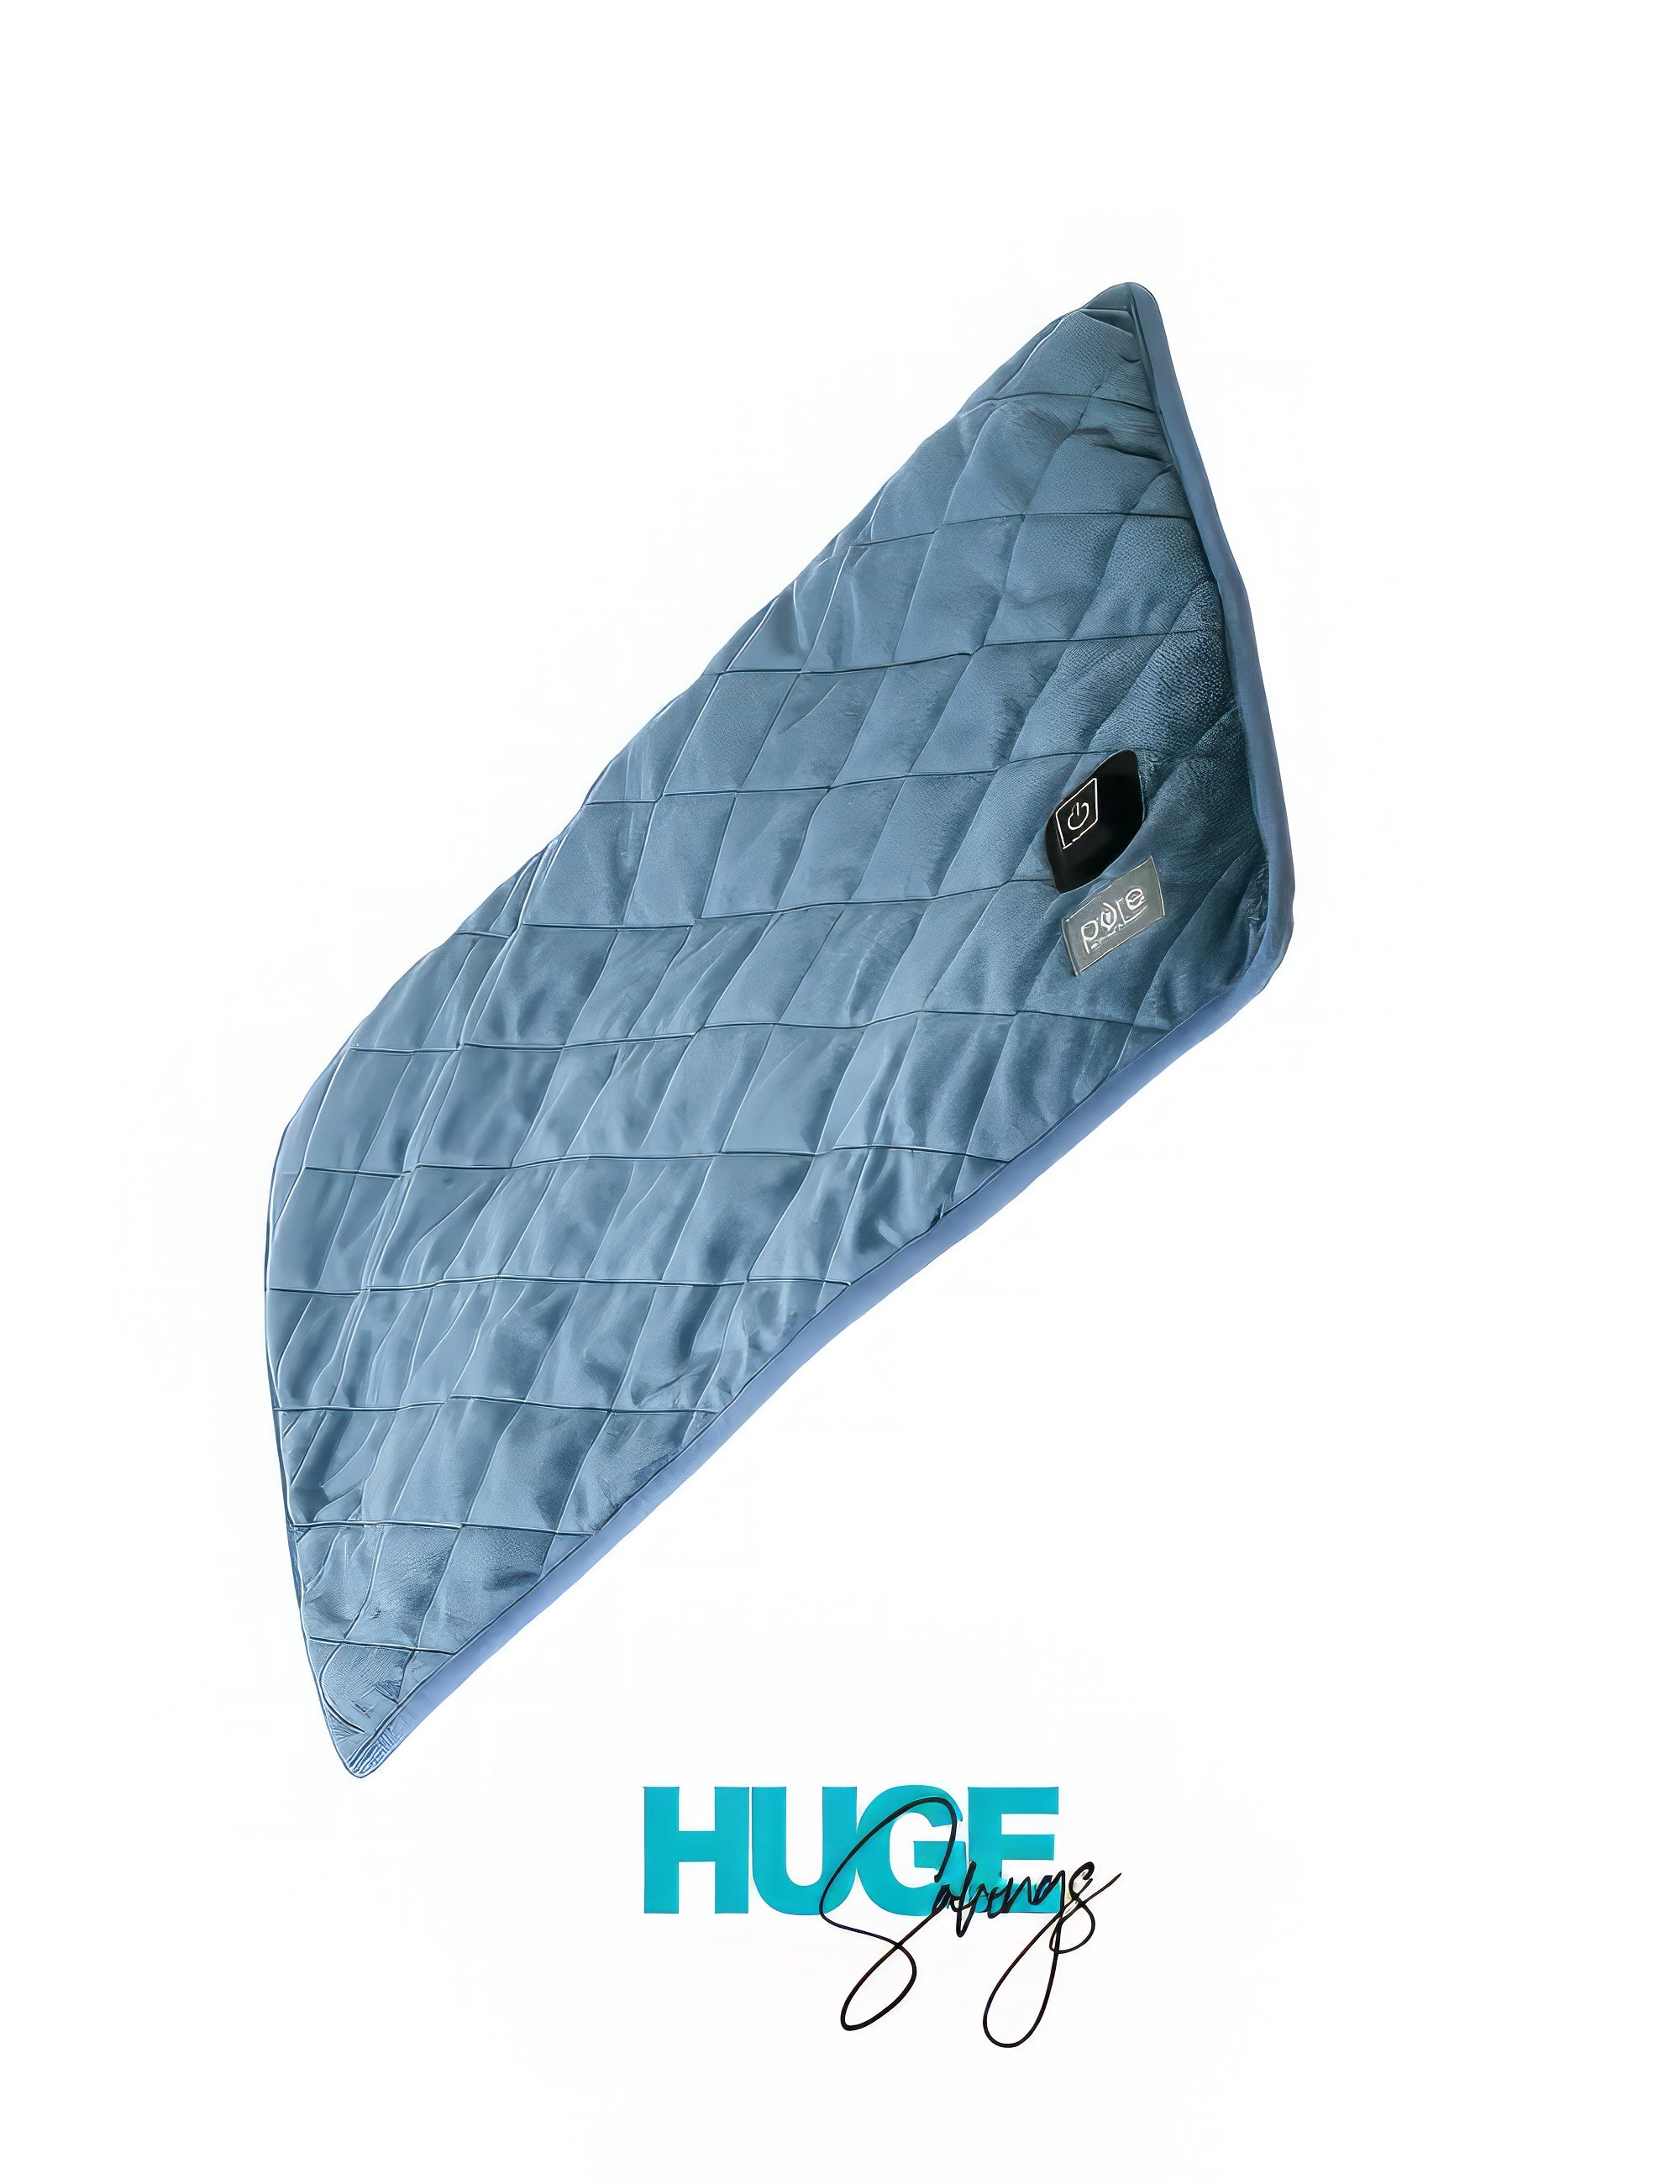 Pure Enrichment® WeightedWarmth™ - 2-in-1 Weighted Lap Pad with Warmer (20” x 12”) 2 lbs, 3 Warmth Settings.